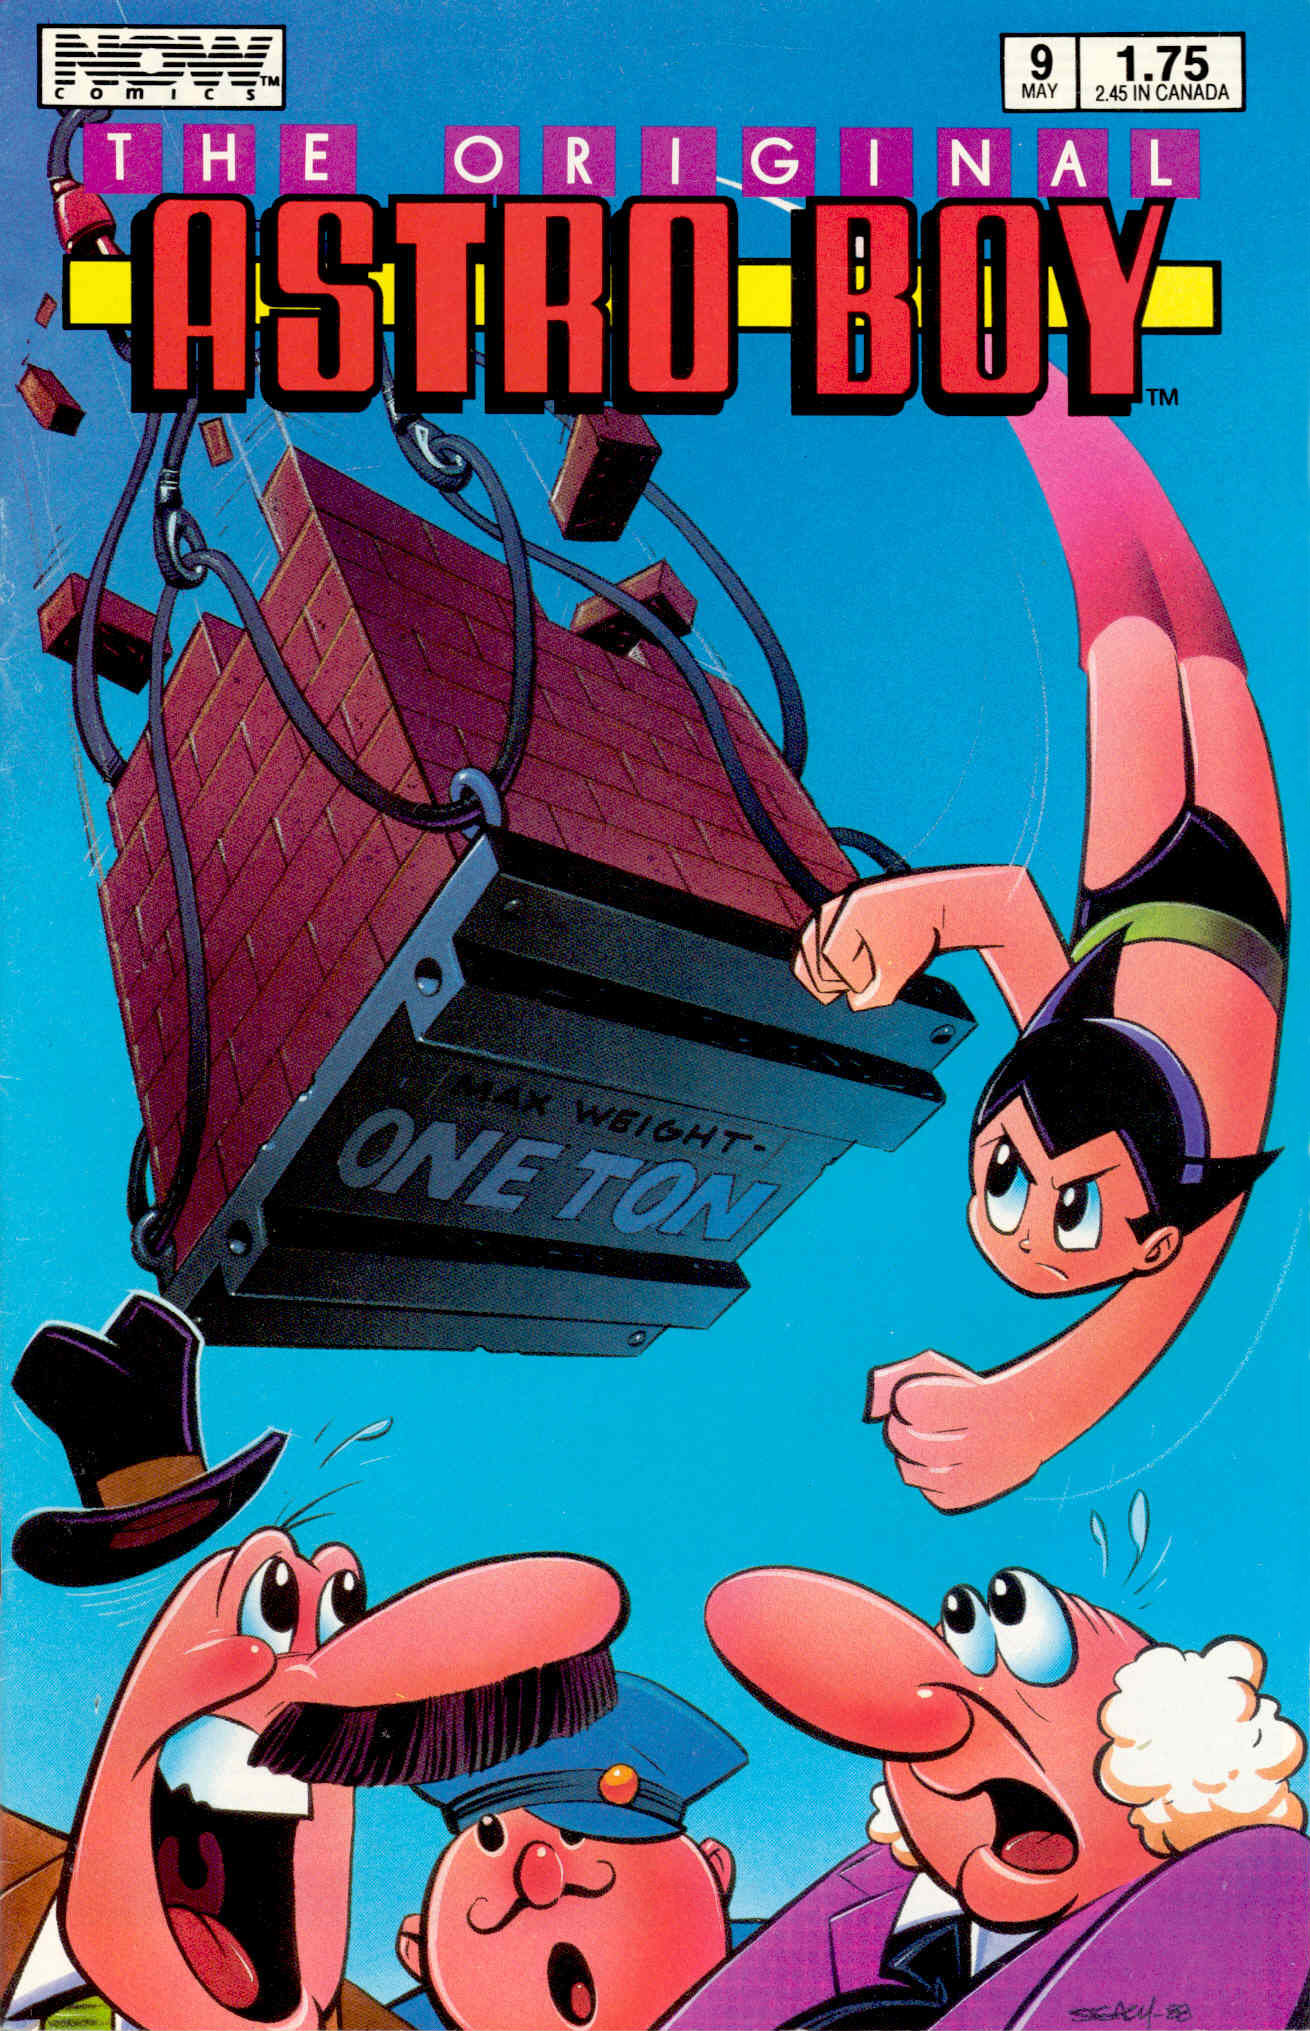 The Original Astro Boy Issue 9 | Read The Original Astro Boy Issue 9 comic  online in high quality. Read Full Comic online for free - Read comics  online in high quality .